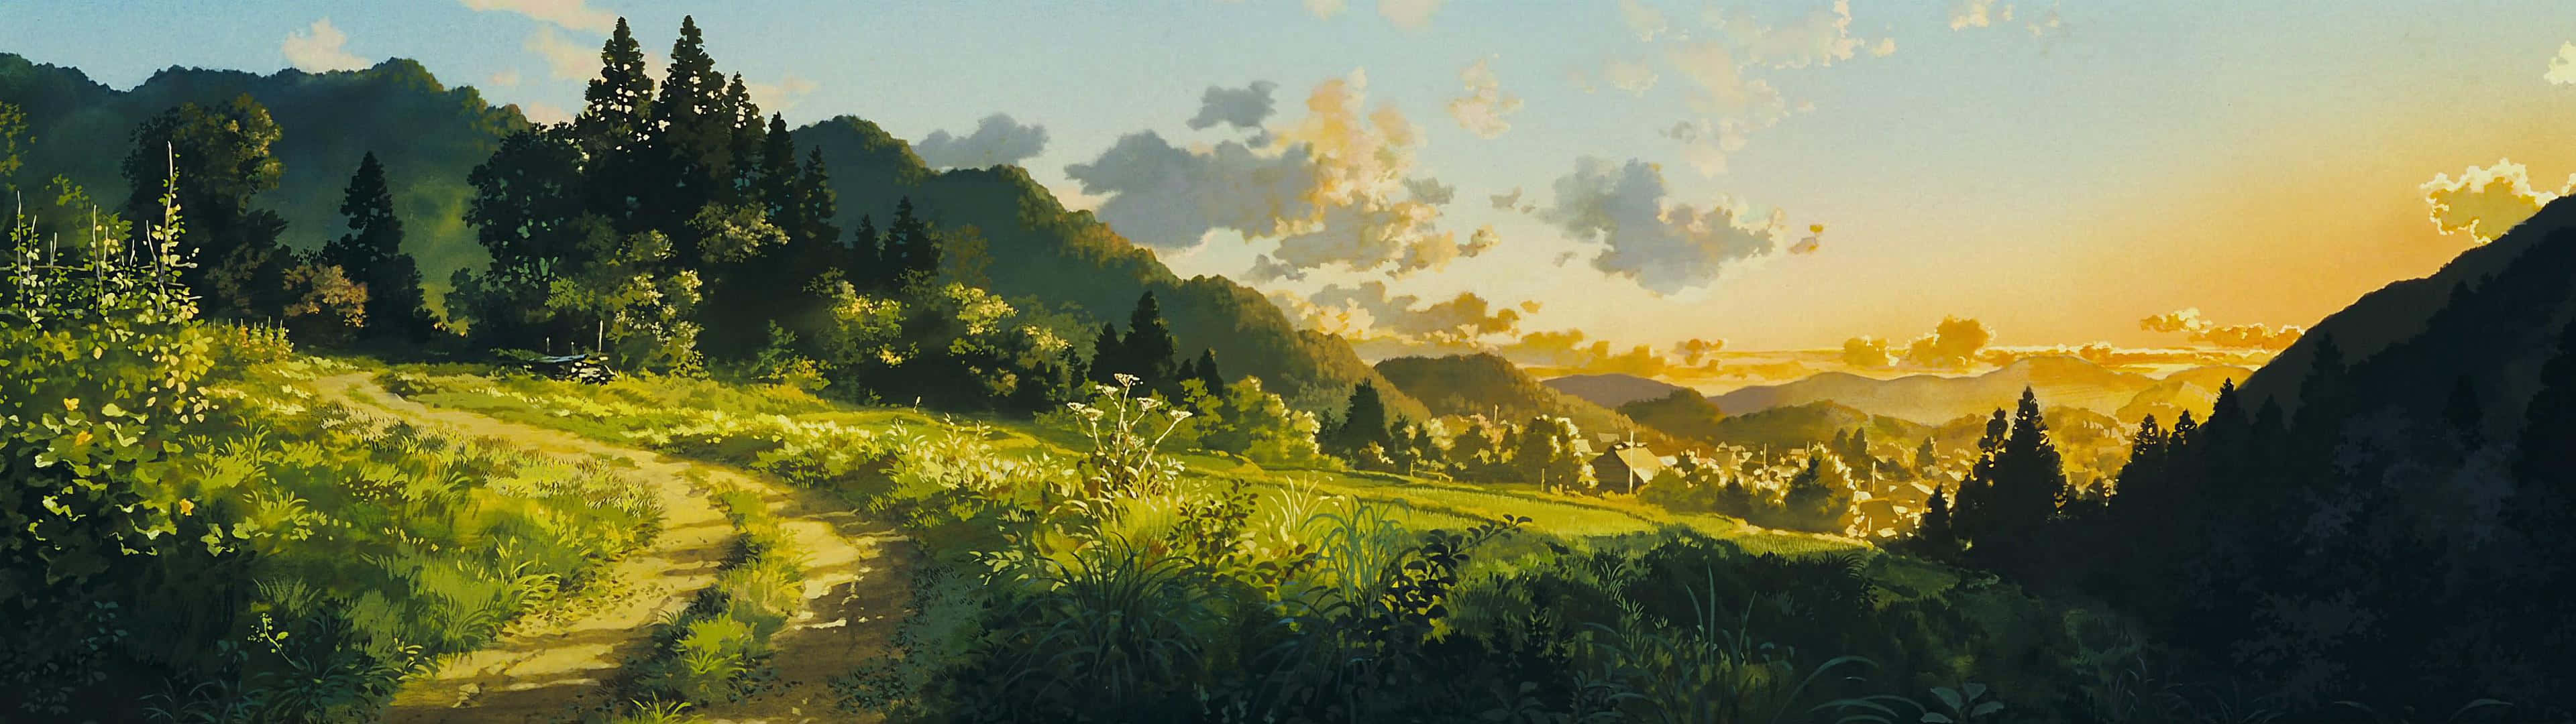 Studio Ghibli's Only Yesterday: A Journey of Self-Discovery Wallpaper